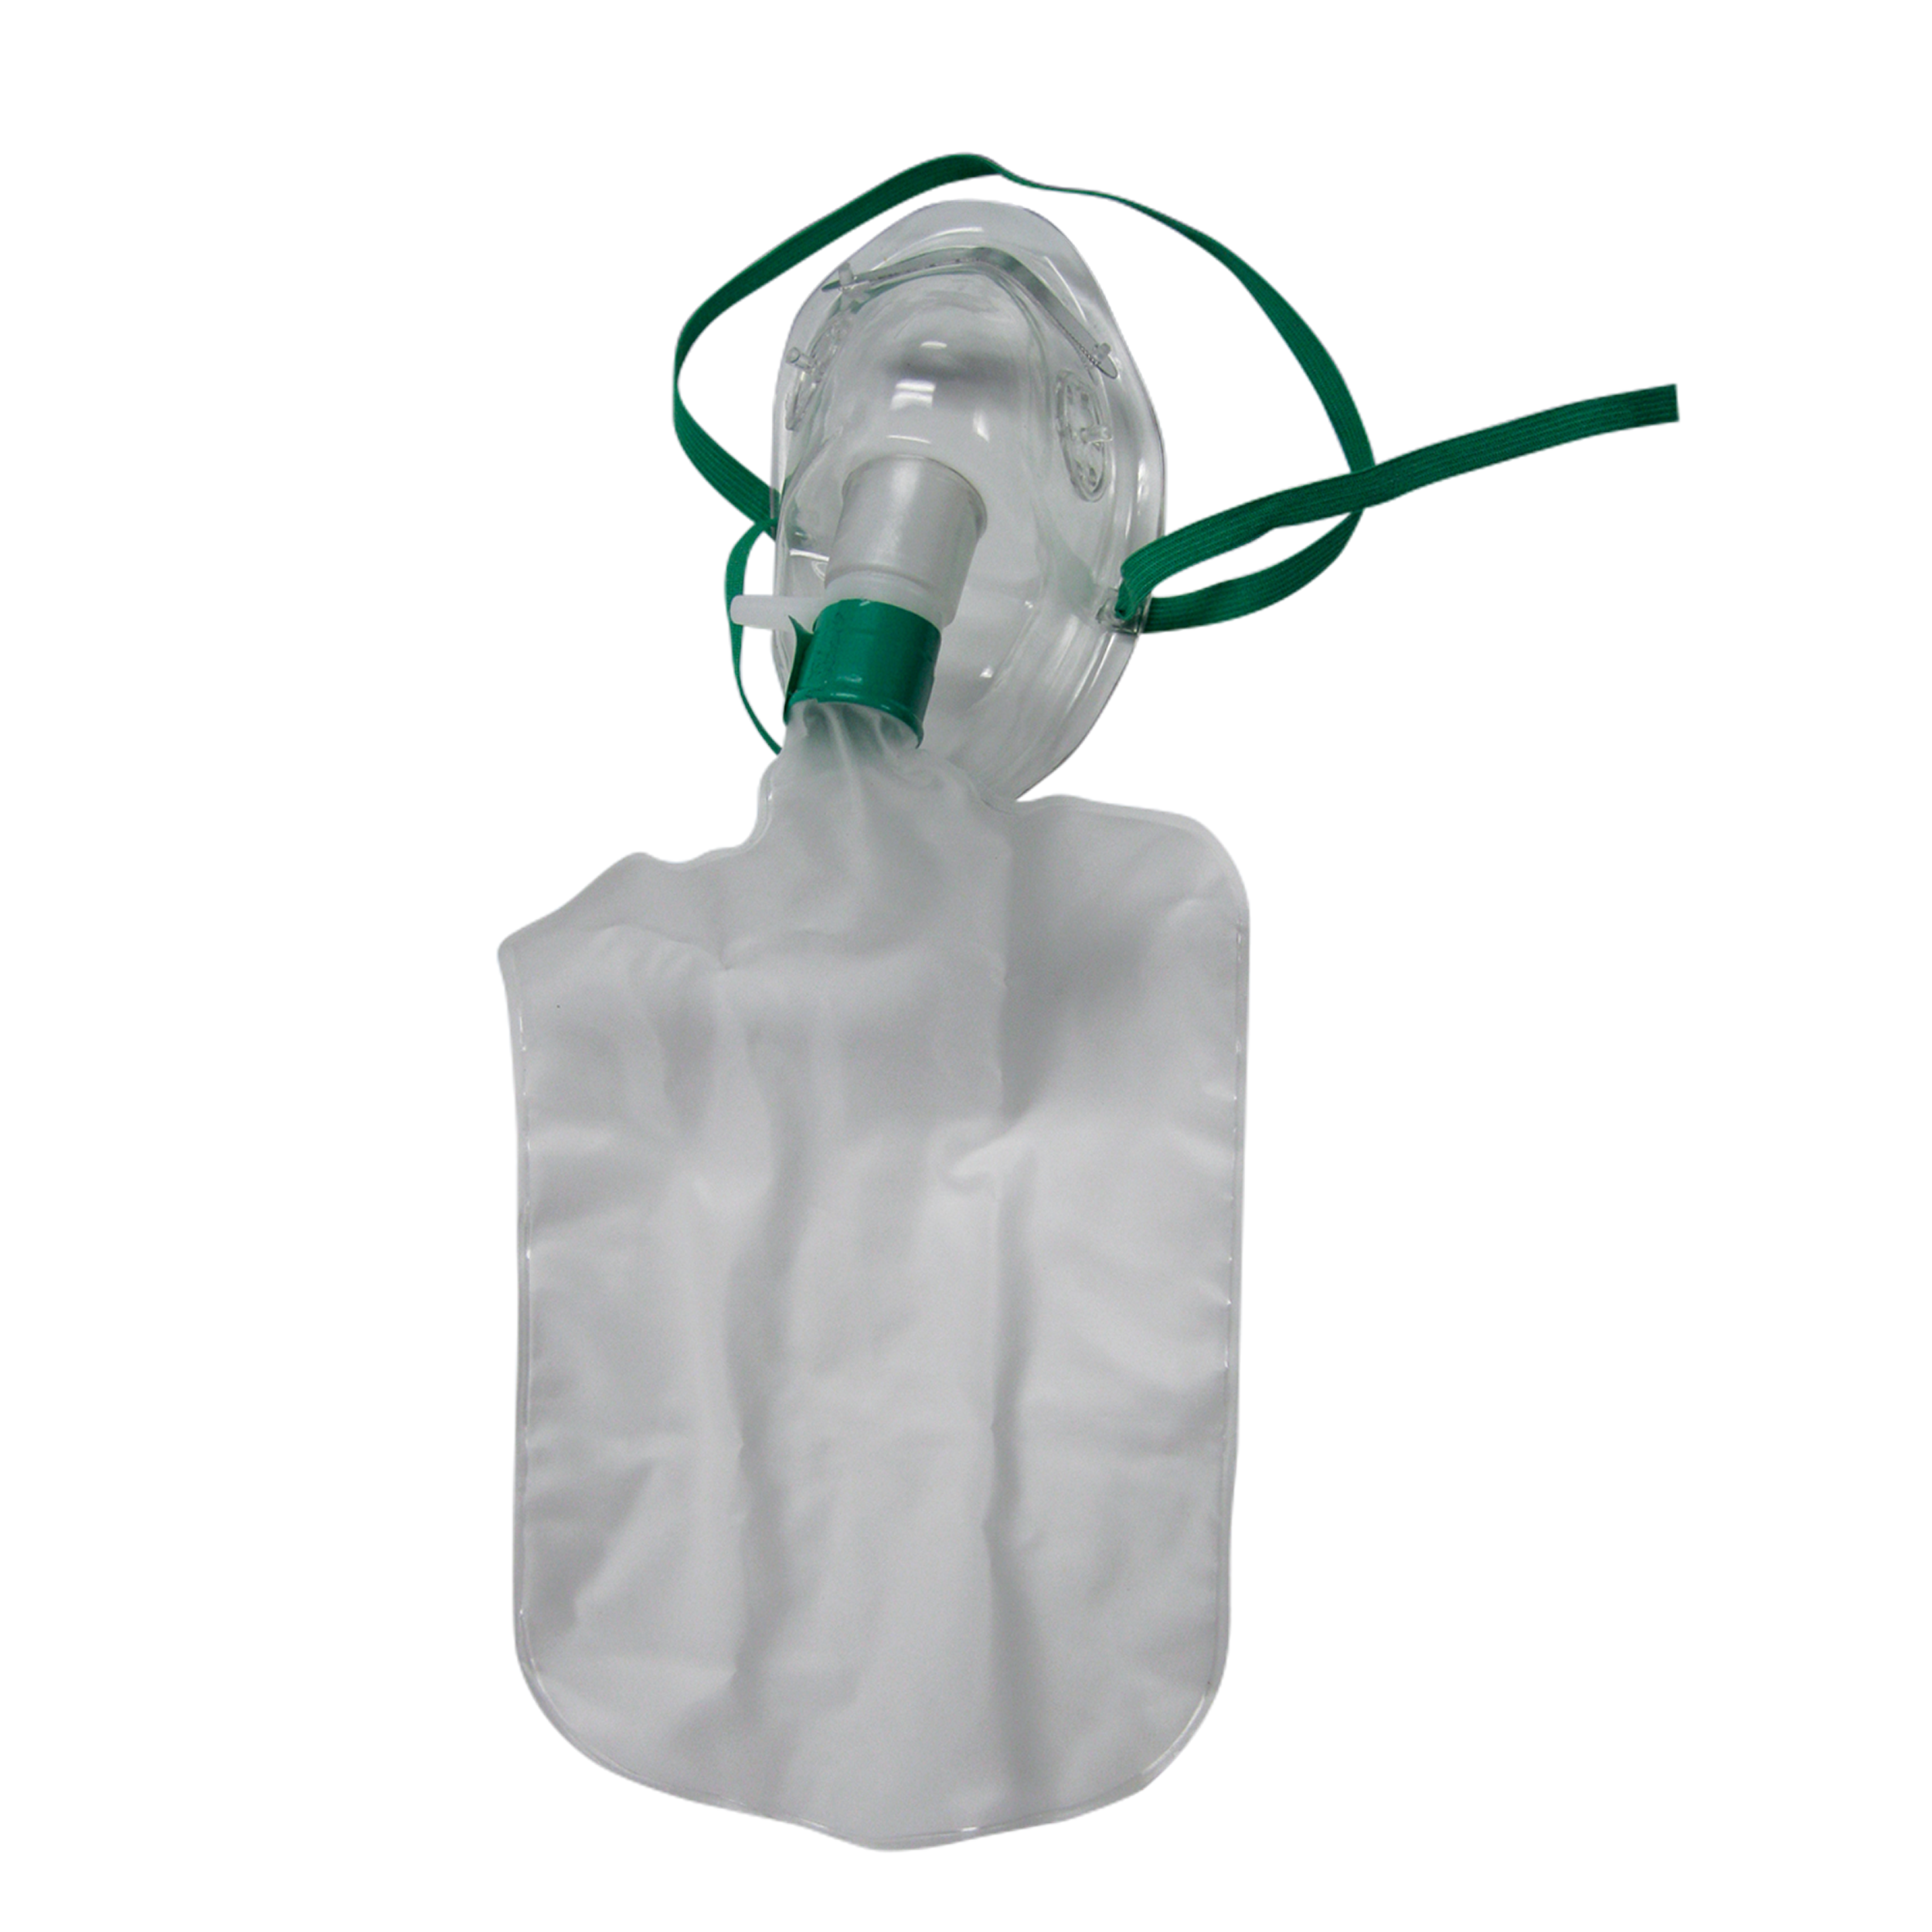 Oxygen Non-Rebreather Elongated Mask - Pediatric-High Concentration